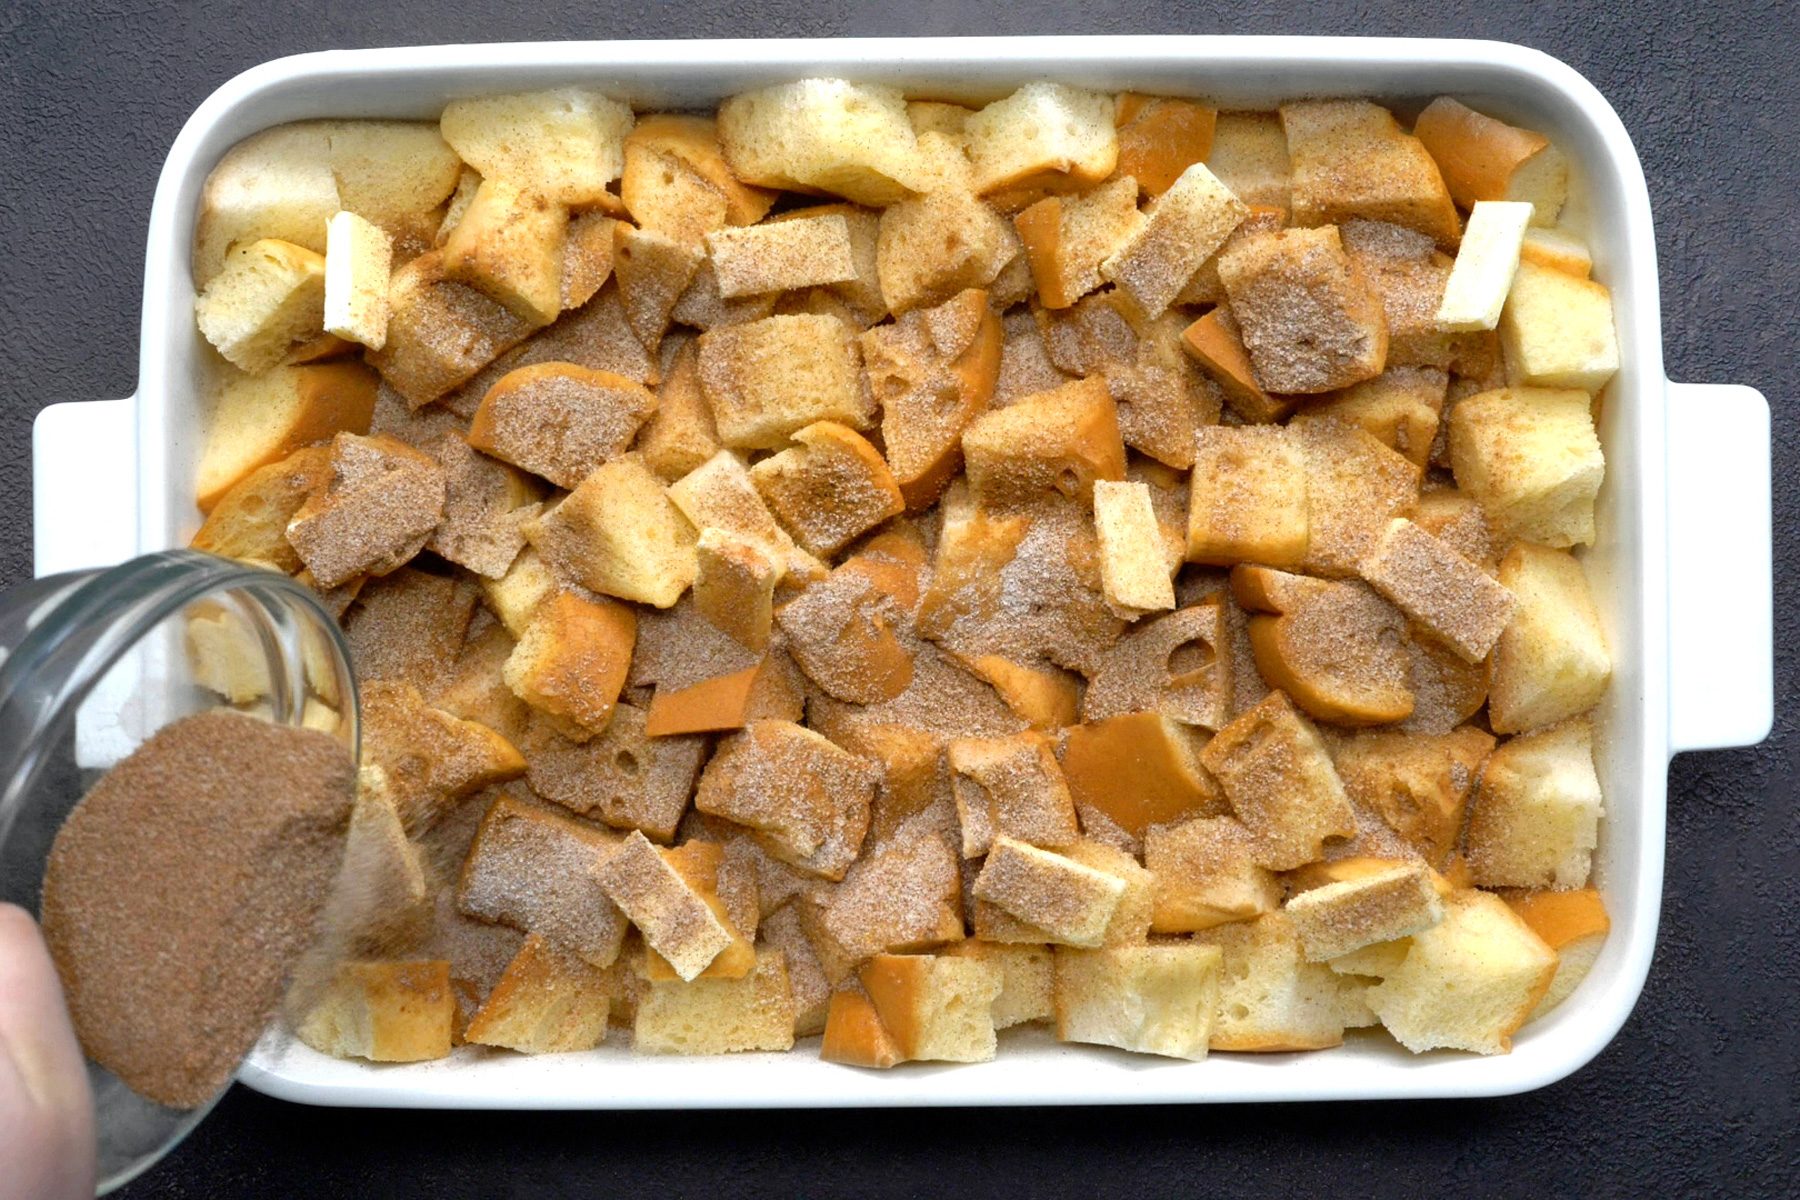 A baking dish filled with French bread cubes topped with the mixture of sugar and cinnamon.